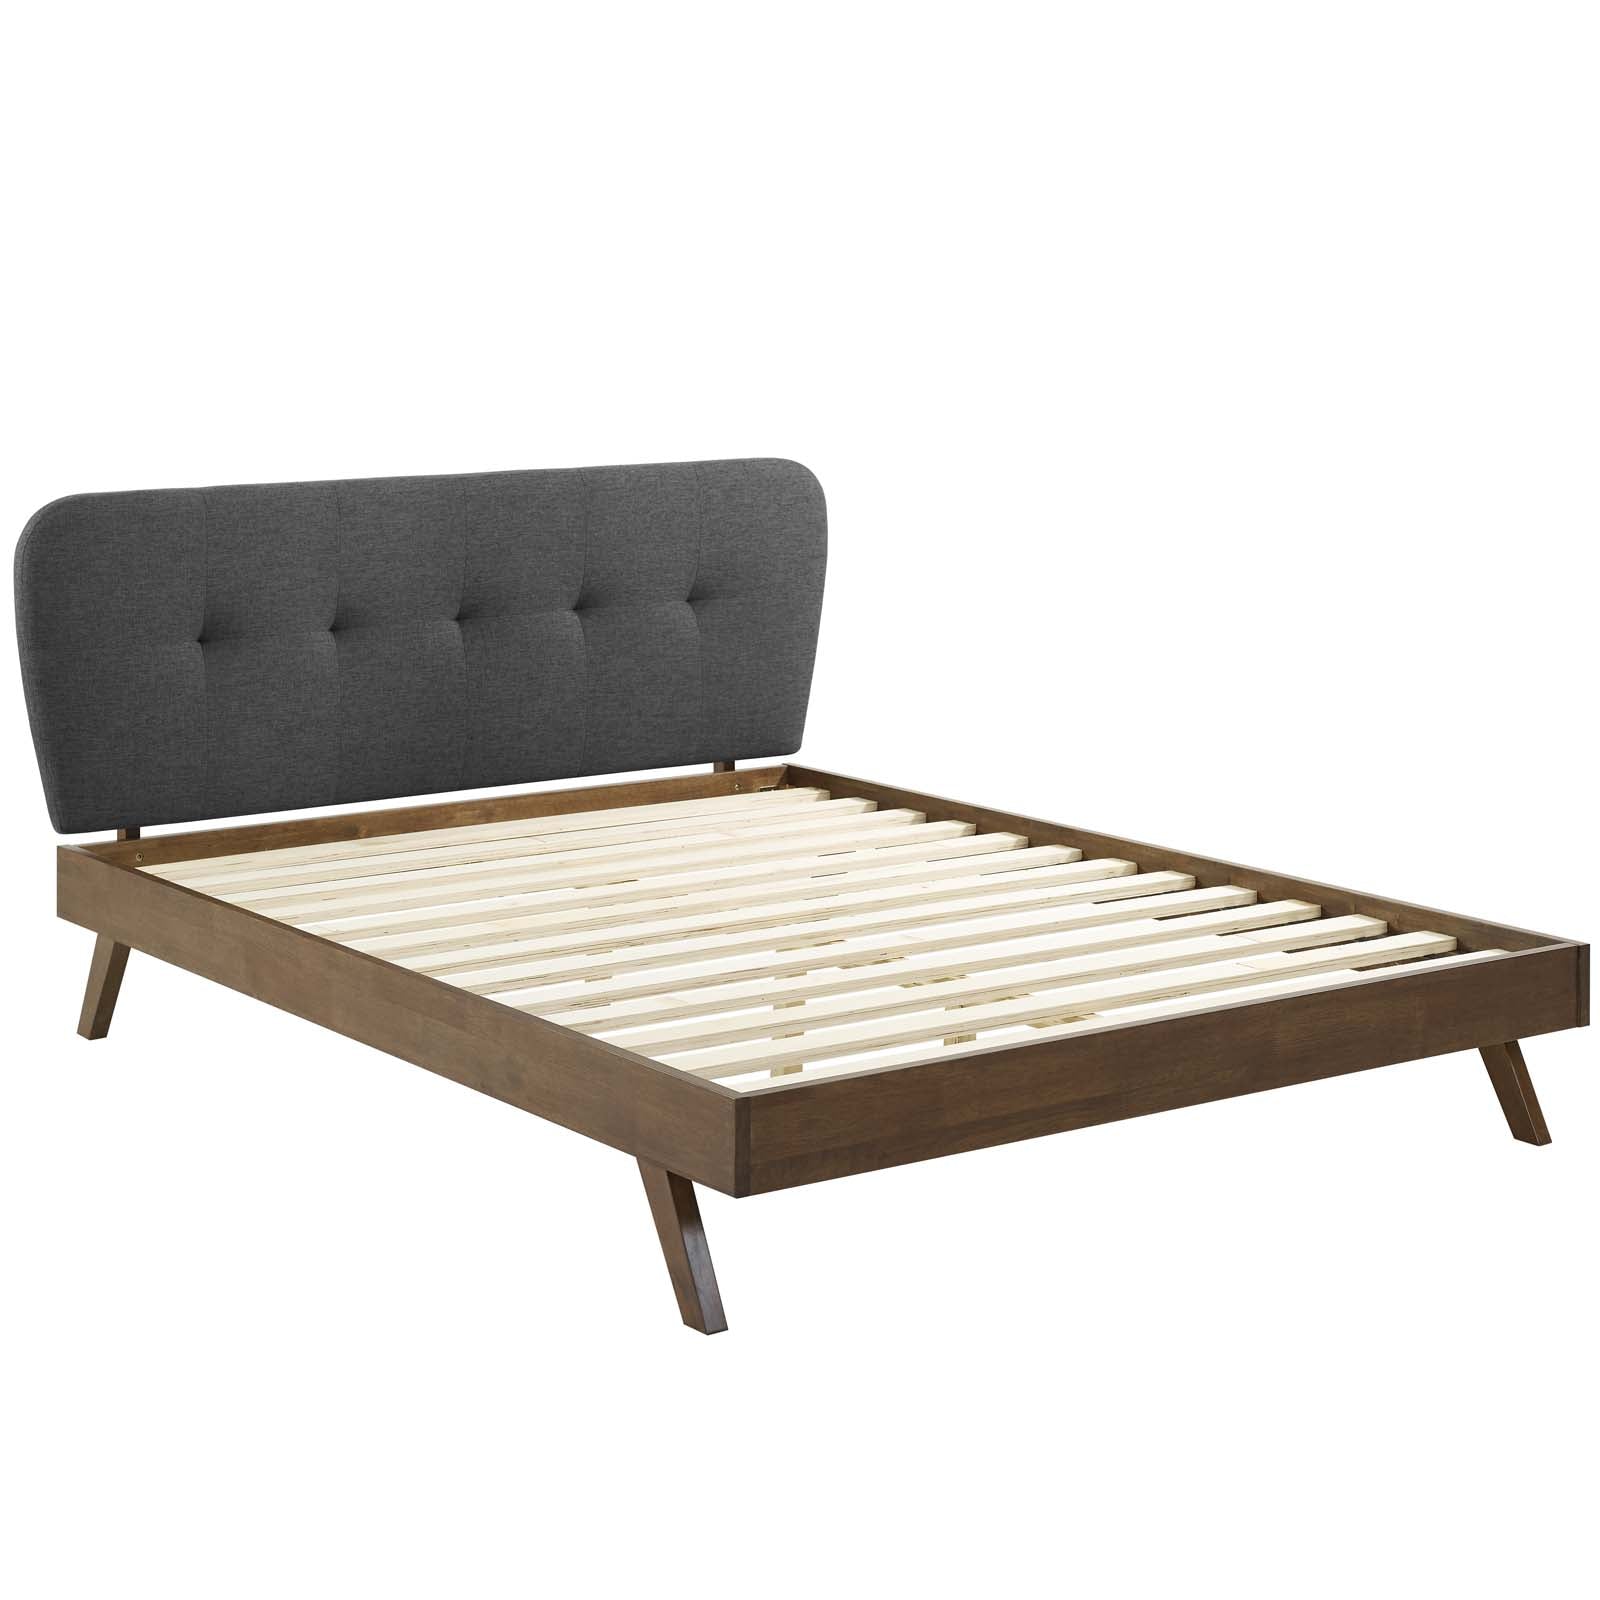 Modway Beds - Gianna Queen Upholstered Platform Bed Gray